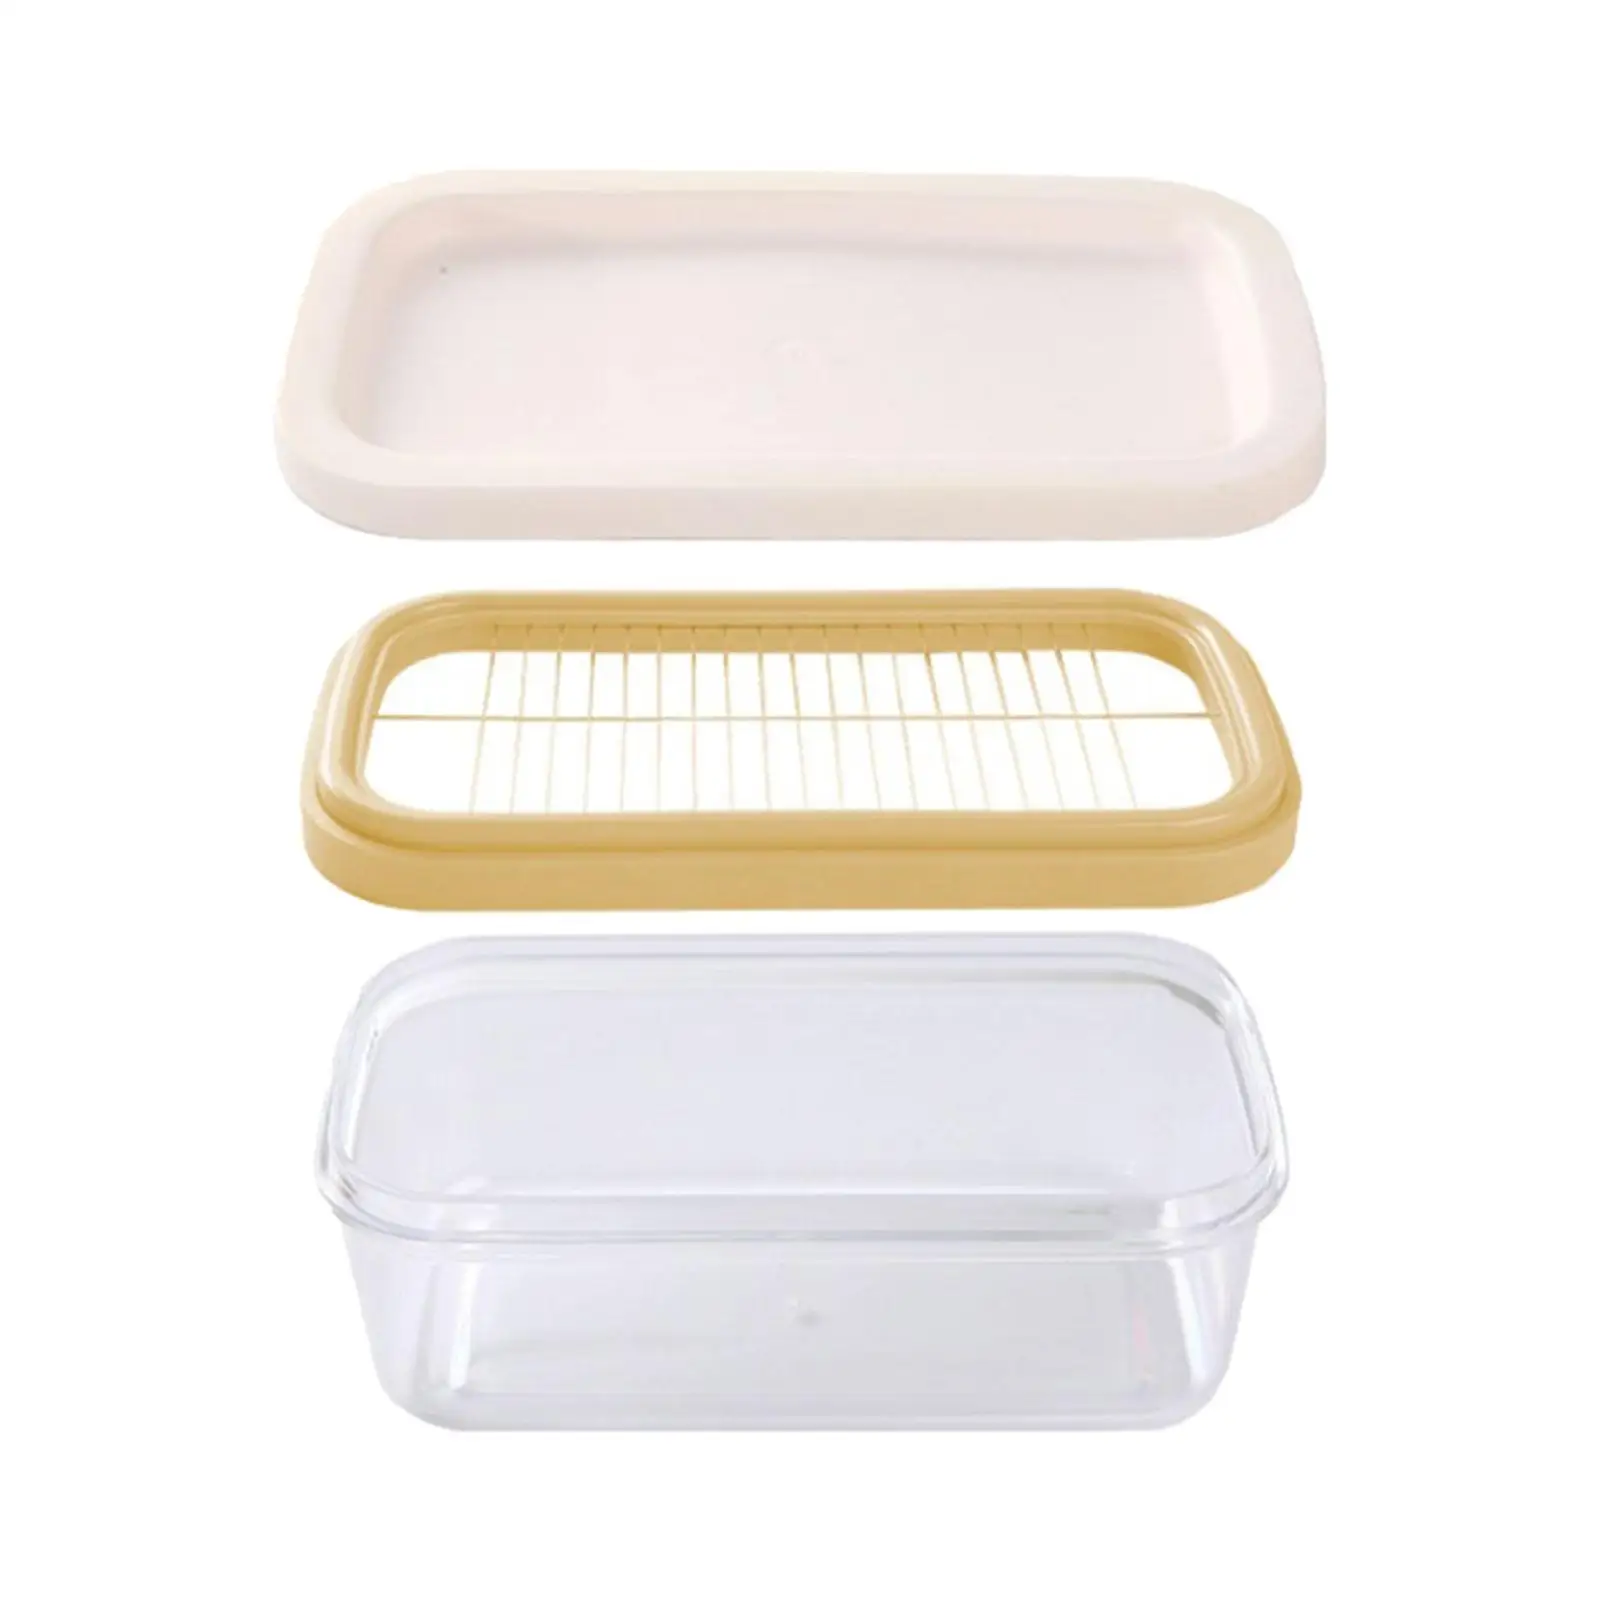 Butter Dish Slicer Countertop Butter Cutting Easy to Cut and Store Transparent Large for Refrigerator Airtight